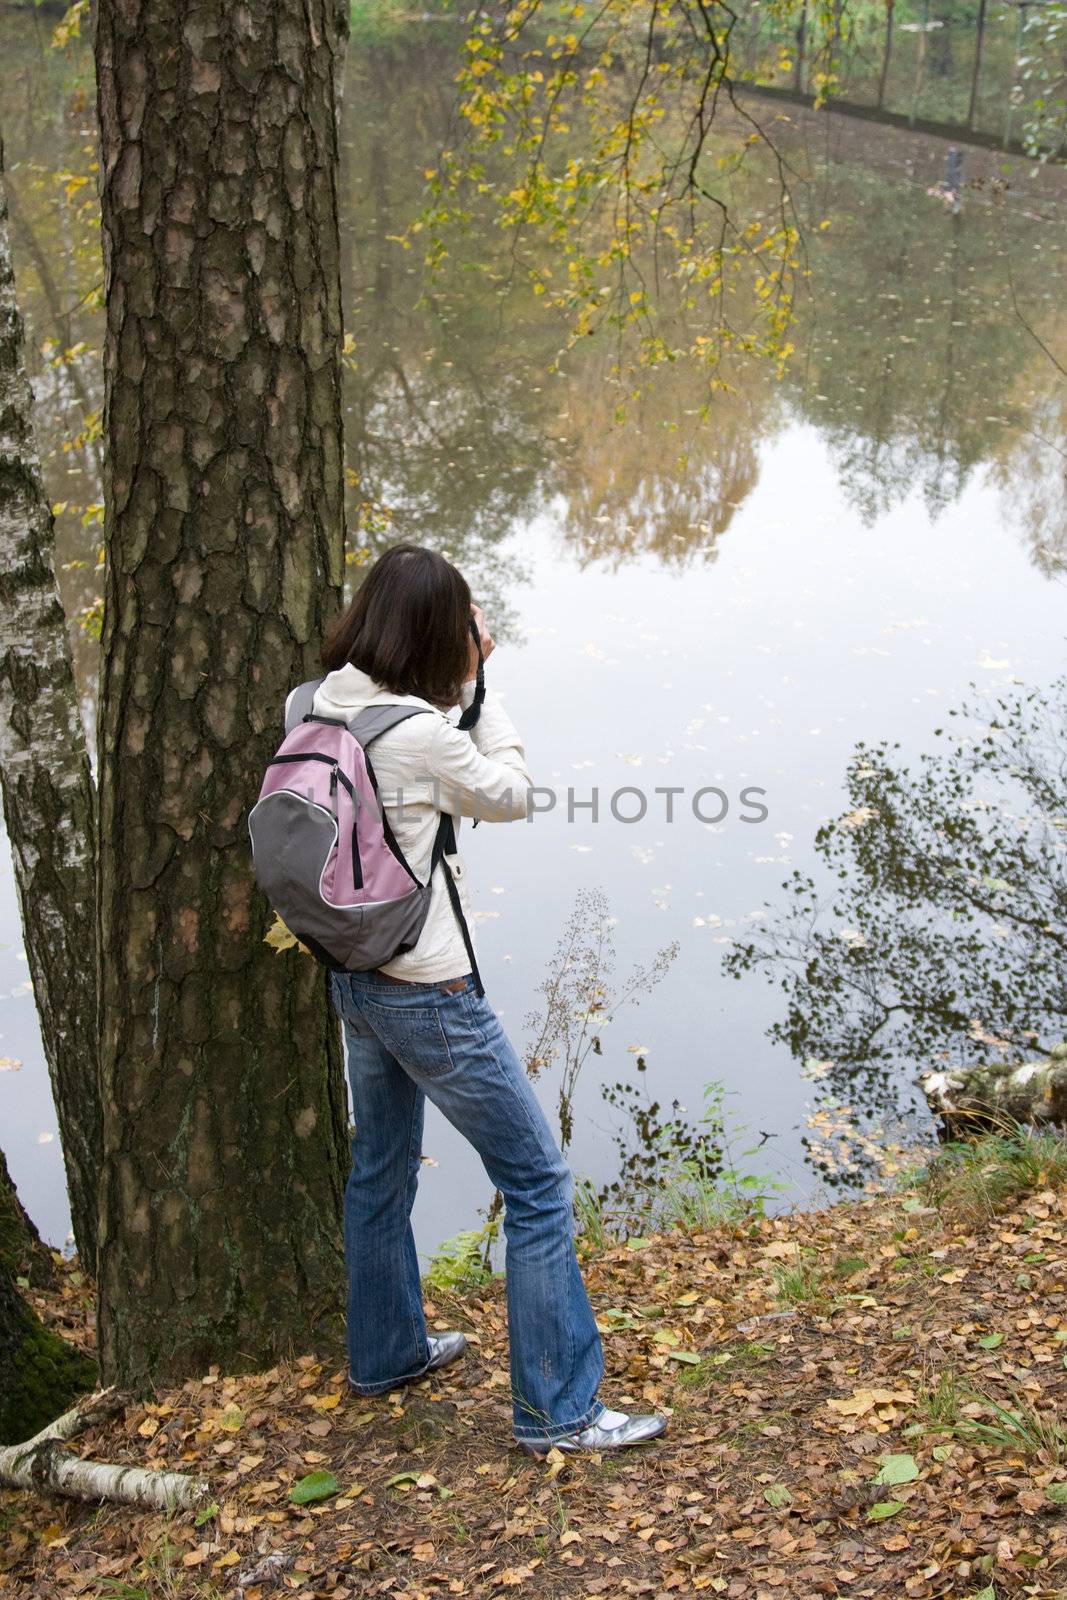 The girl with a backpack costs the person to lake